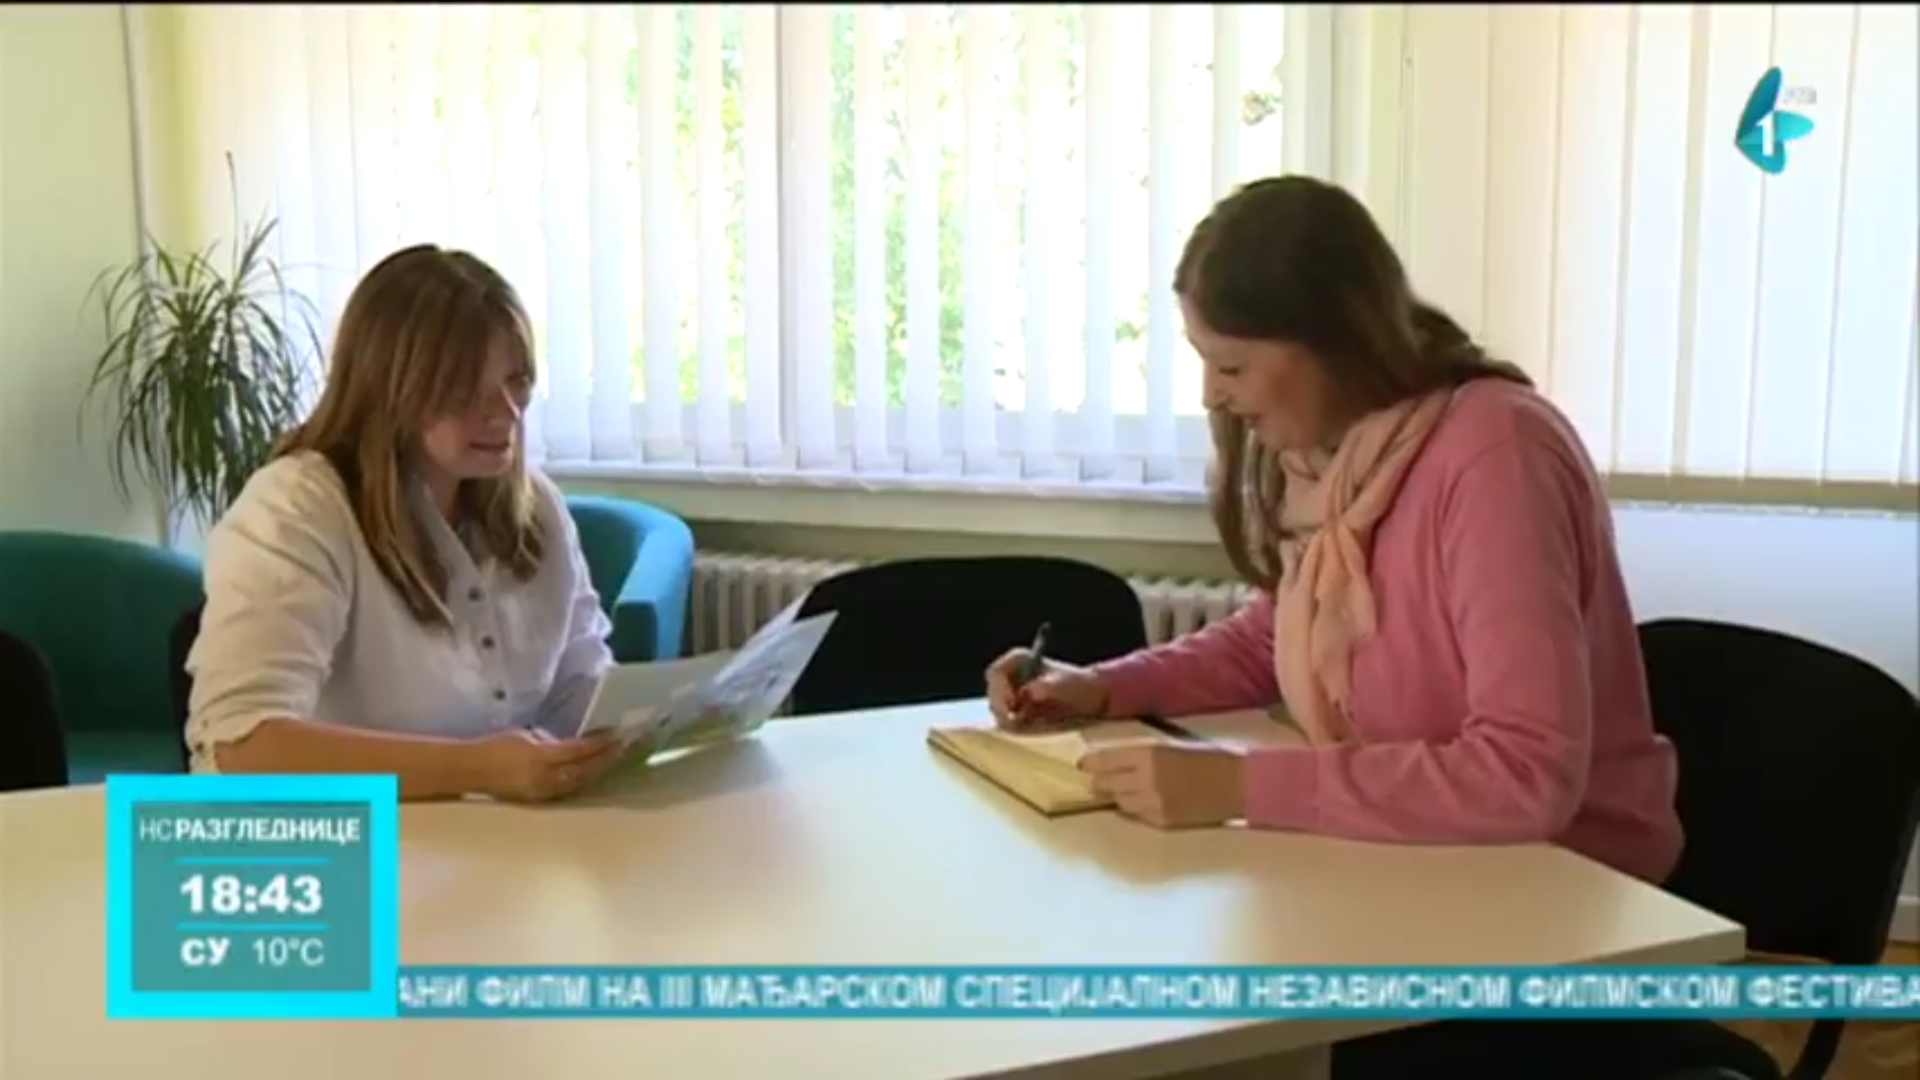 About foster care on Radio Television of Vojvodina